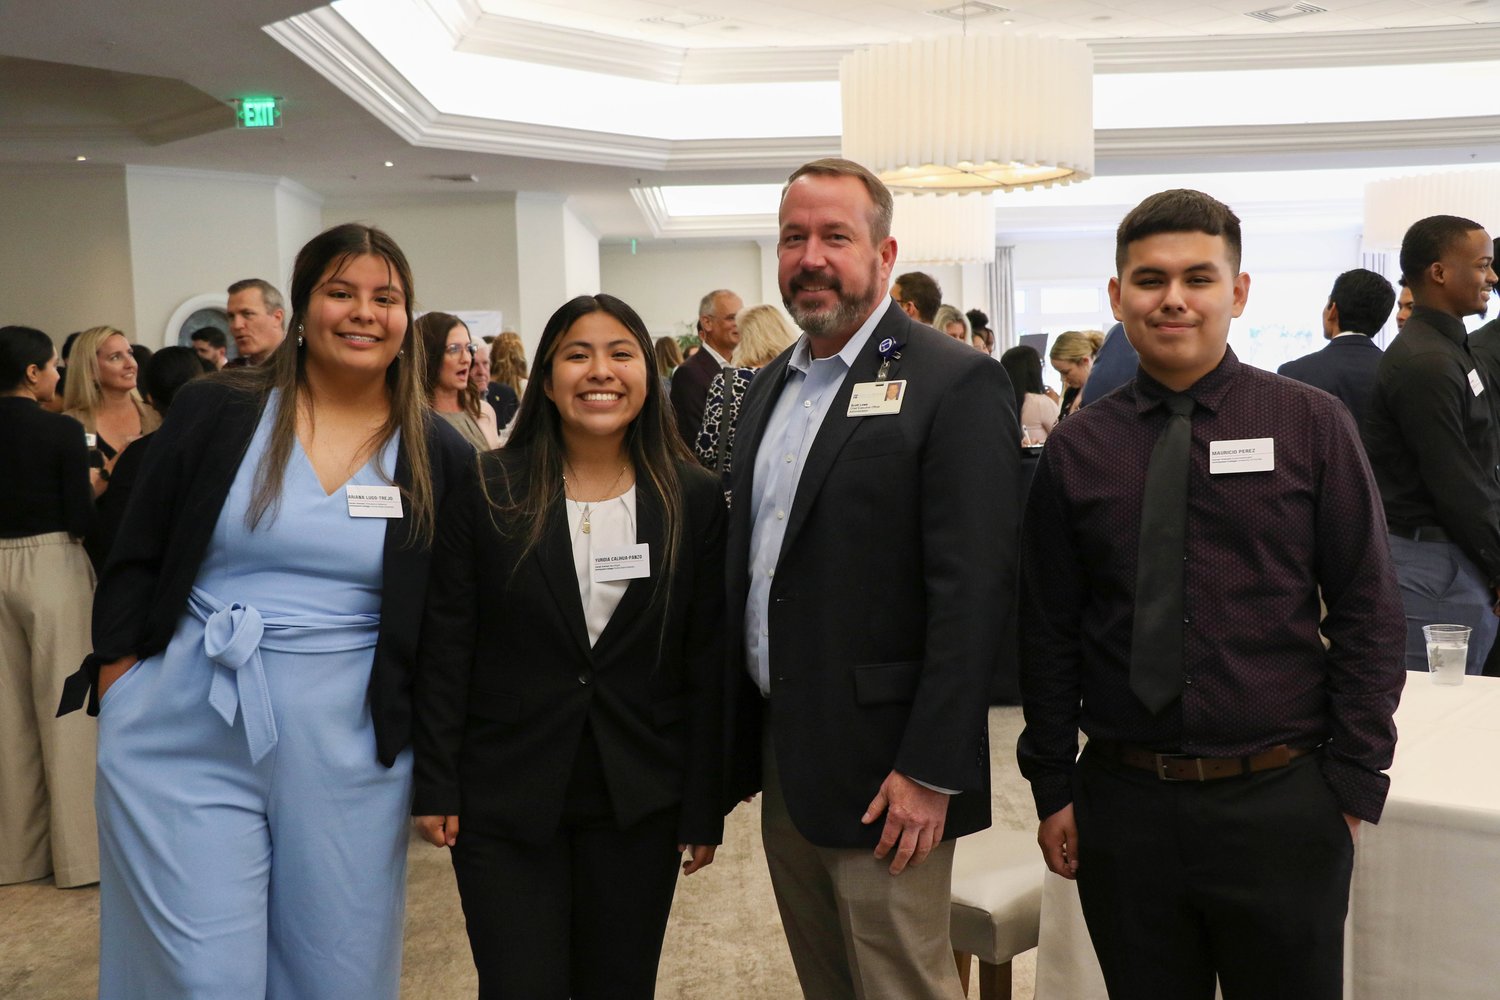 Students from the Immokalee Foundation’s Healthcare Pathway pose with Mareket CEO for Physicians Regional Healthcare System Scott Lowe (third from left).